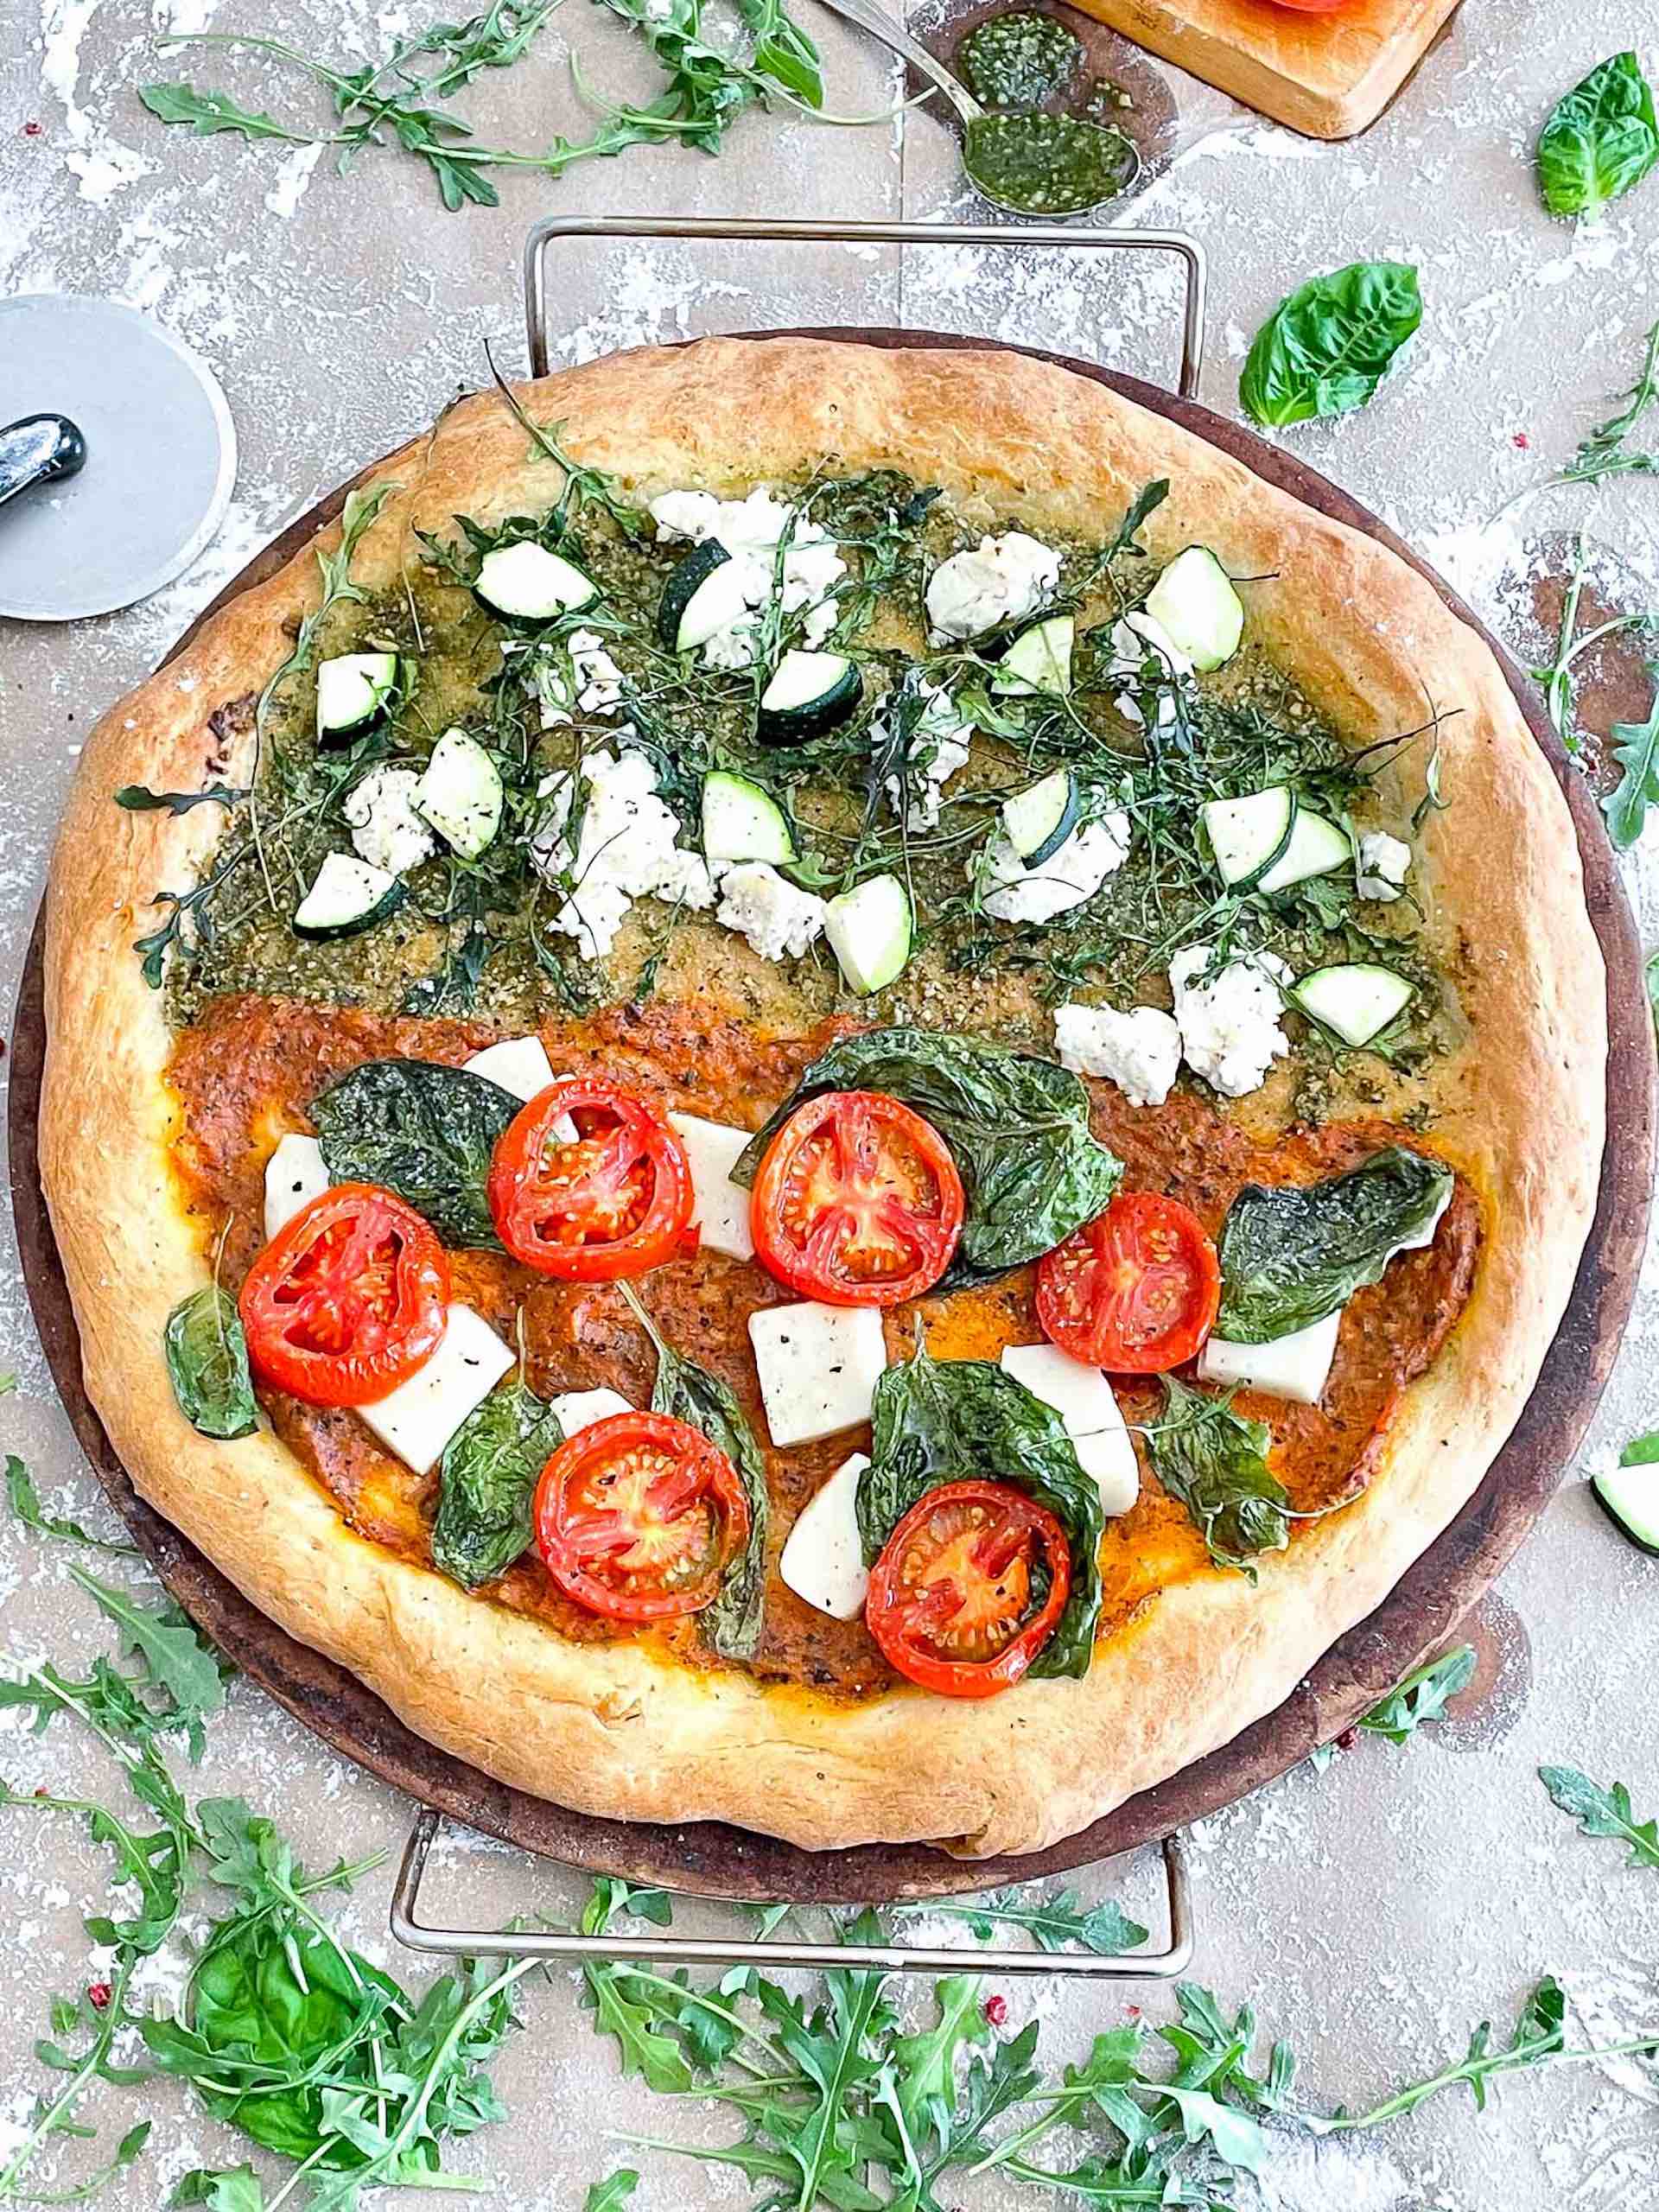 Homemade Half-and-Half Artisan Pizza Our homemade half-and-half artisan pizza is as good as any restaurant recipe! So simple and delicious to make, you’re sure to add this to your weekly rotation.